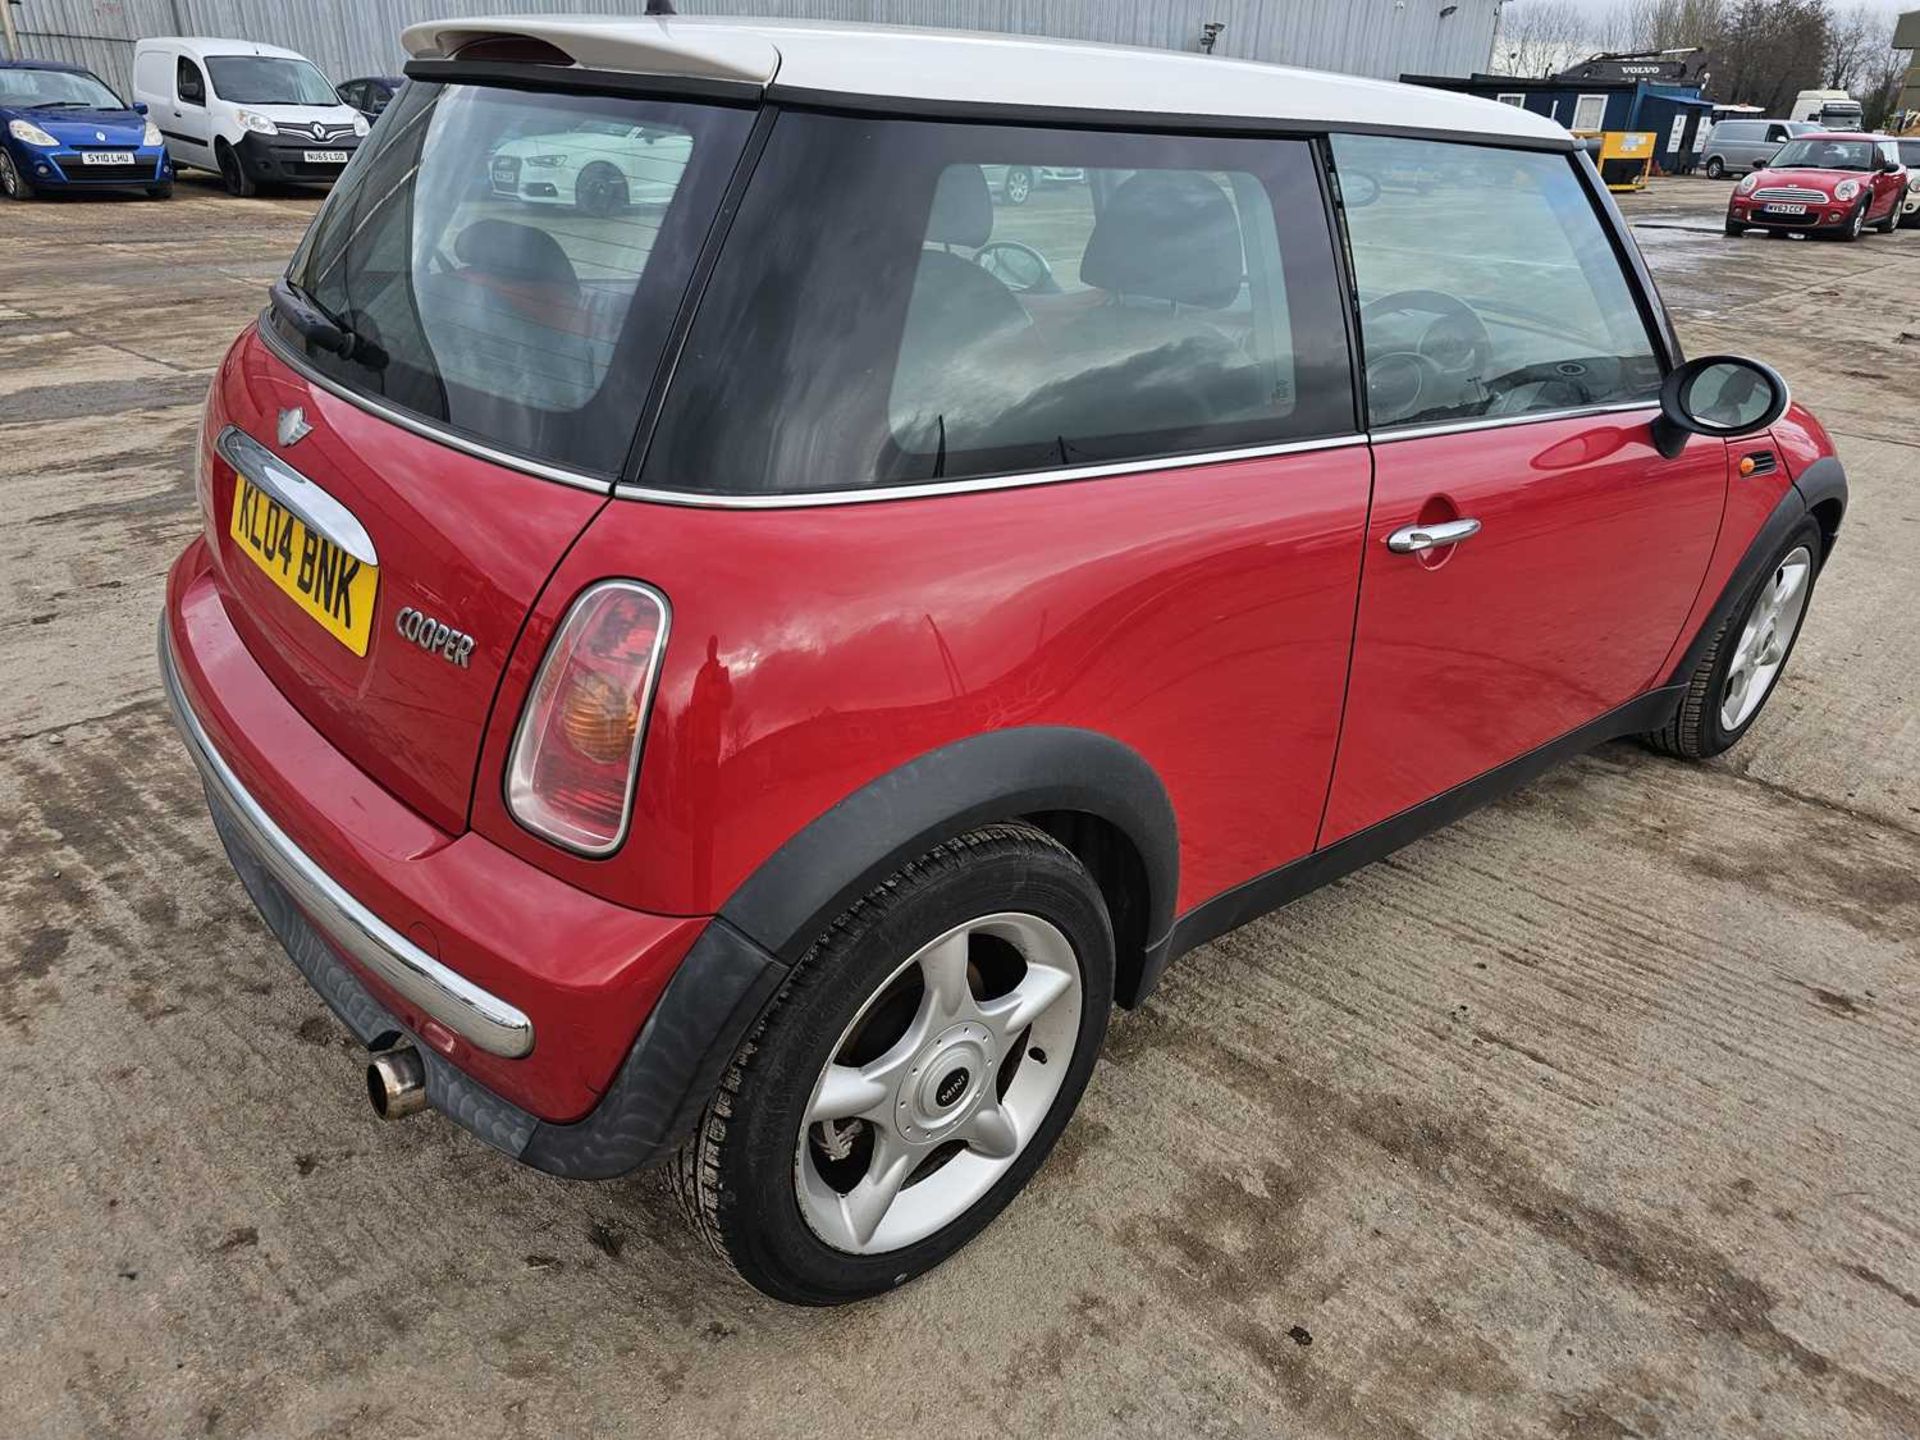 2004 Mini Cooper, 5 Speed, Half Leather, Heated Seats, A/C (Reg. Docs. & Service History Available,  - Image 7 of 29